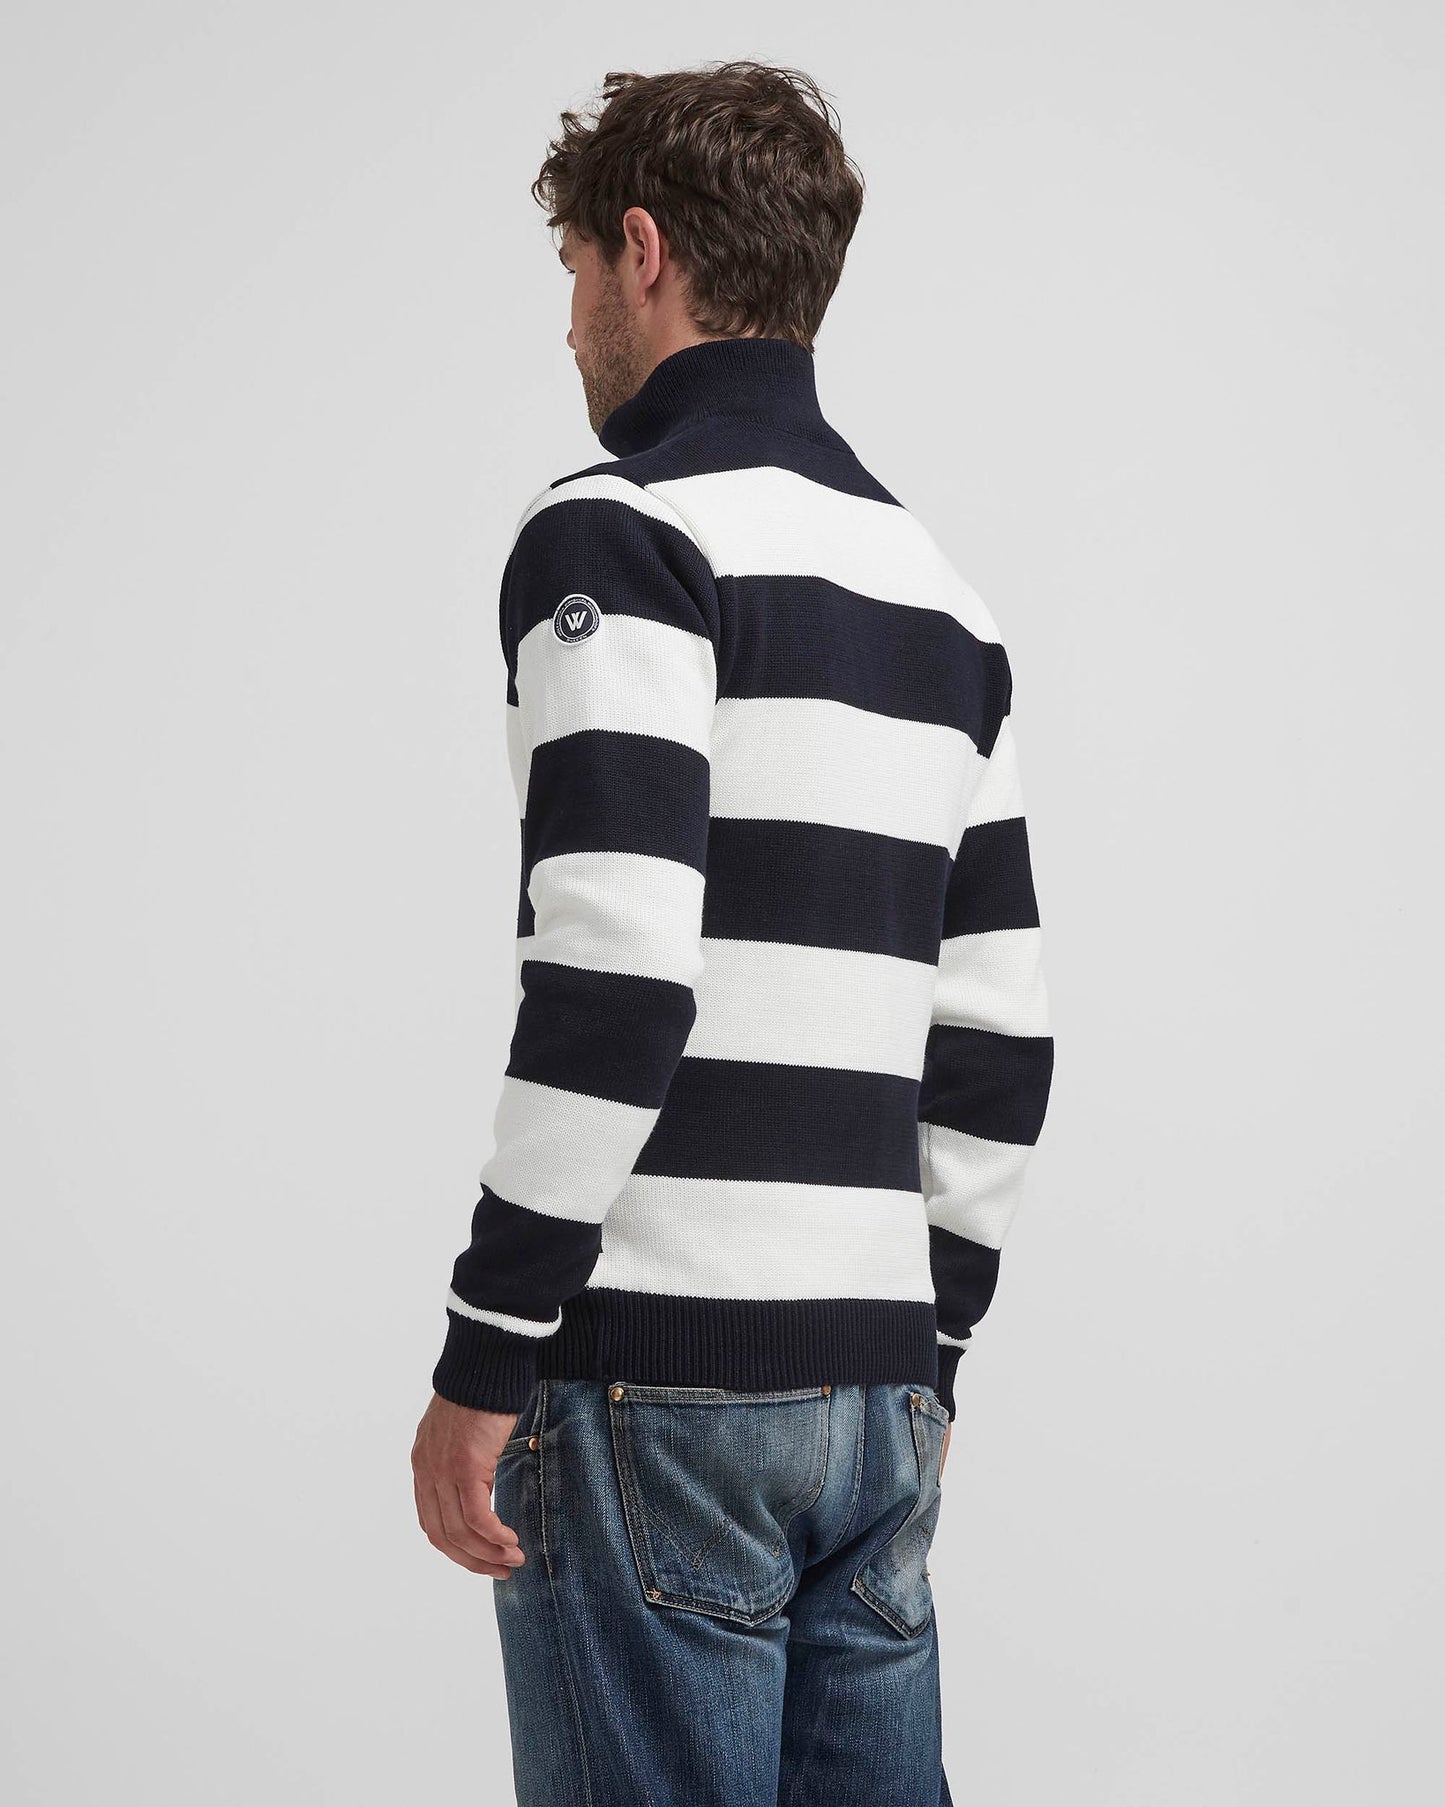 Holebrook Anders T-Neck WP Windproof Sweater